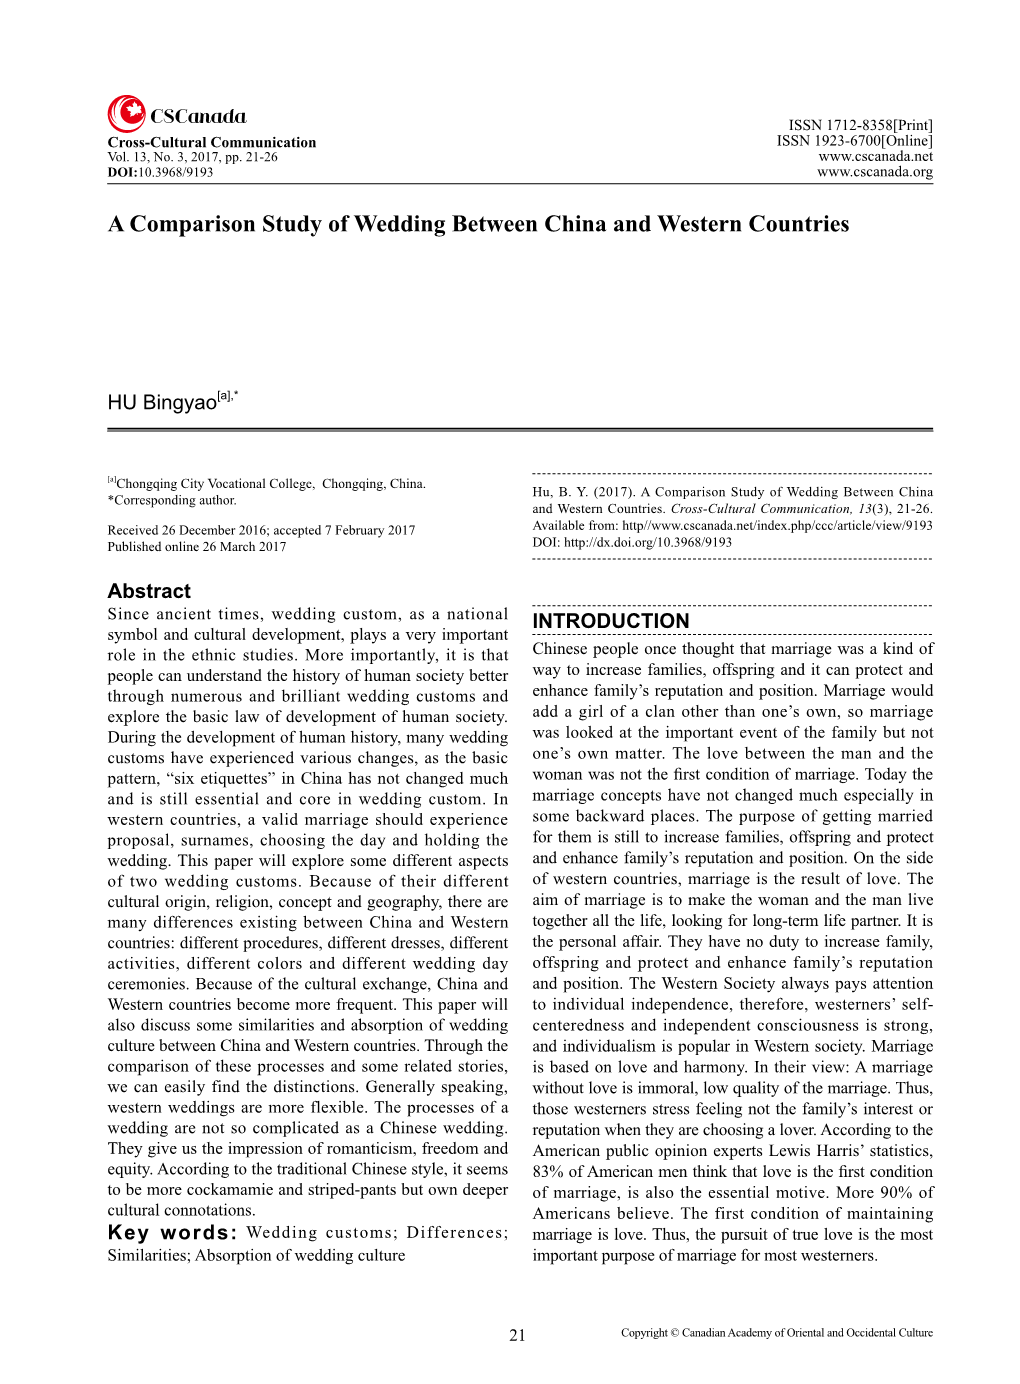 A Comparison Study of Wedding Between China and Western Countries